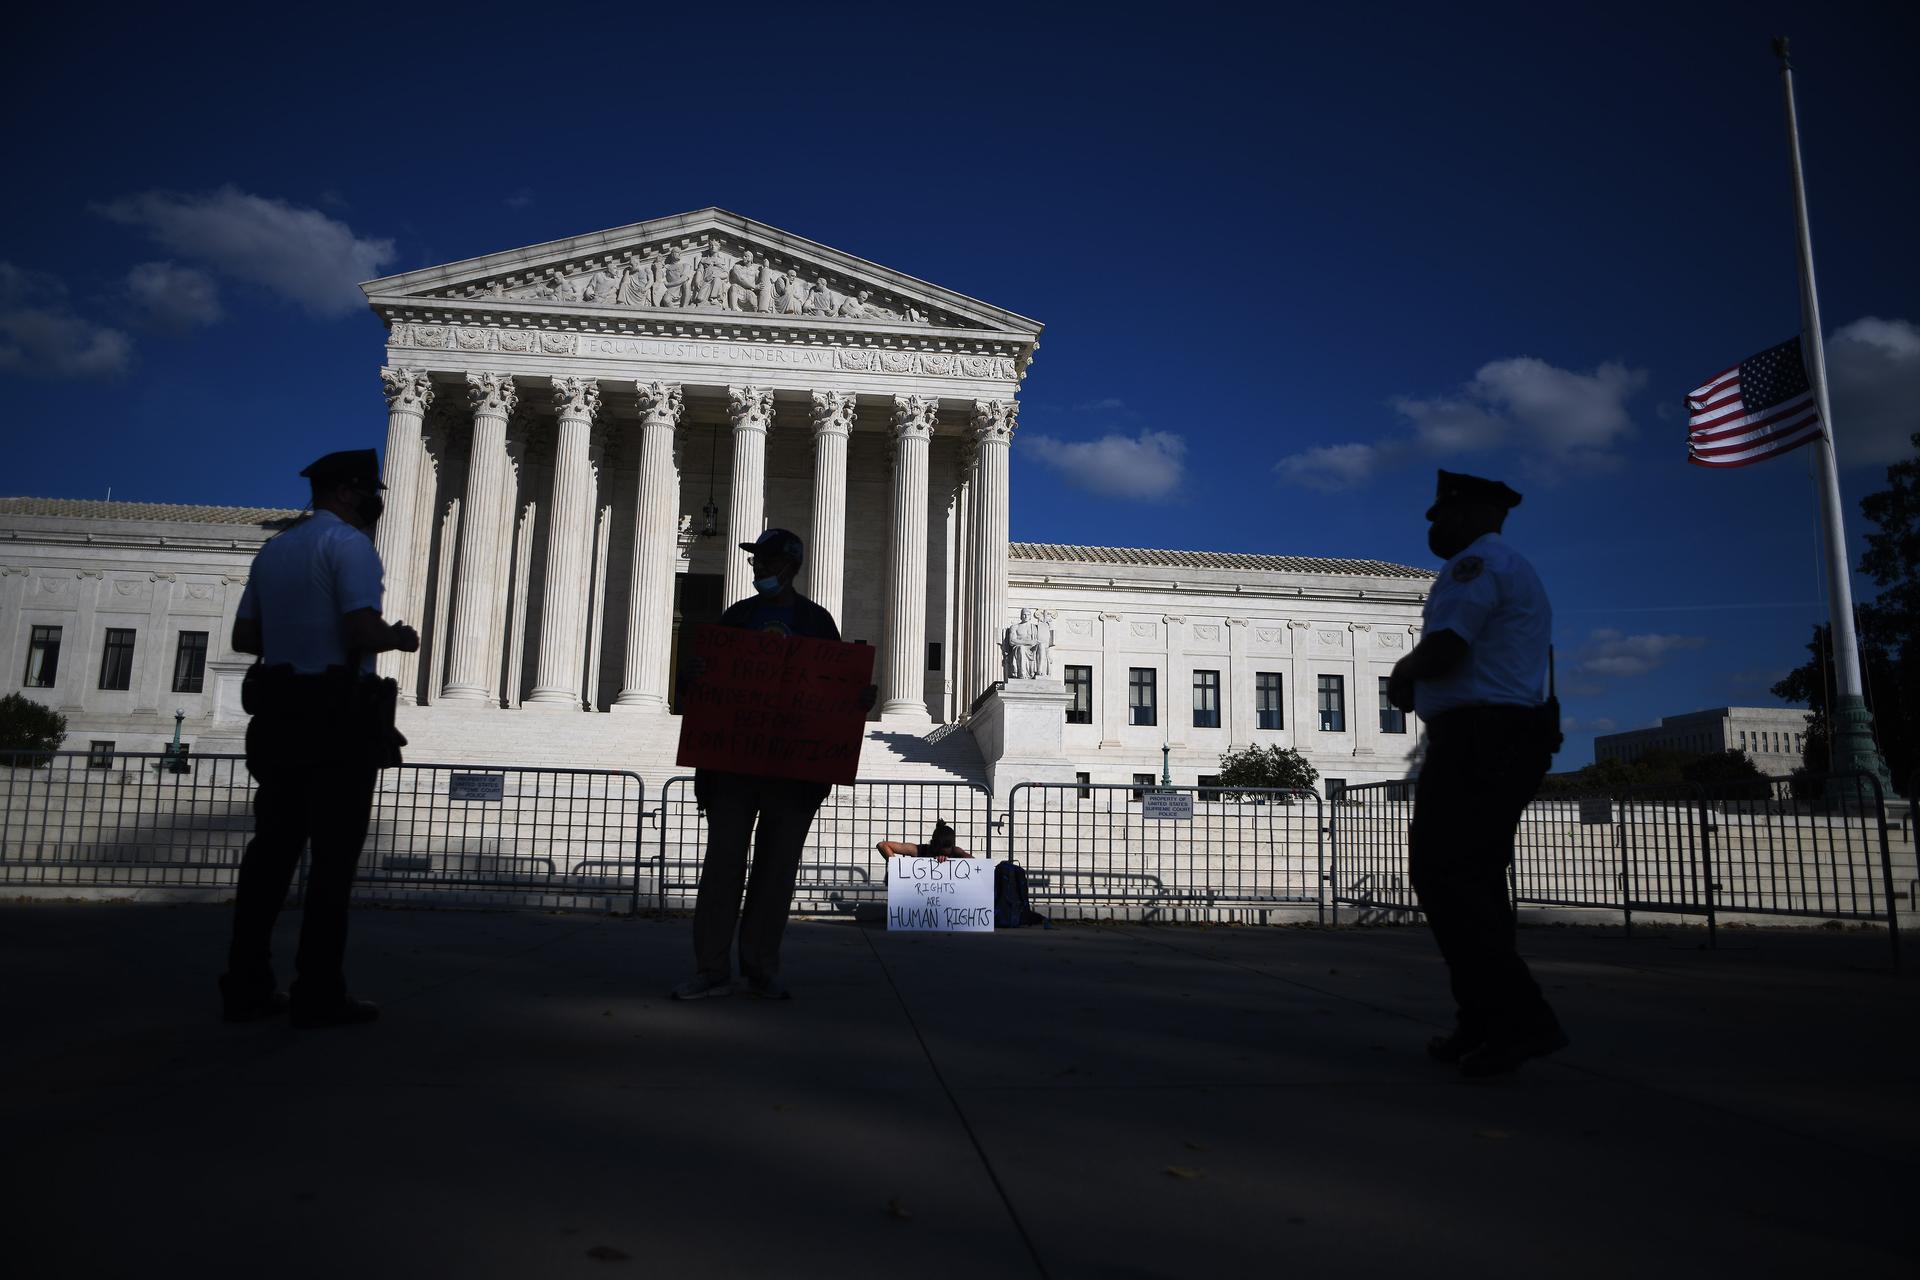 Police officers talk to one of two demonstrators who gather outside the Supreme Court in Washington, D.C., October 15, 2020, to protest the nomination of Justice Amy Coney Barrett.